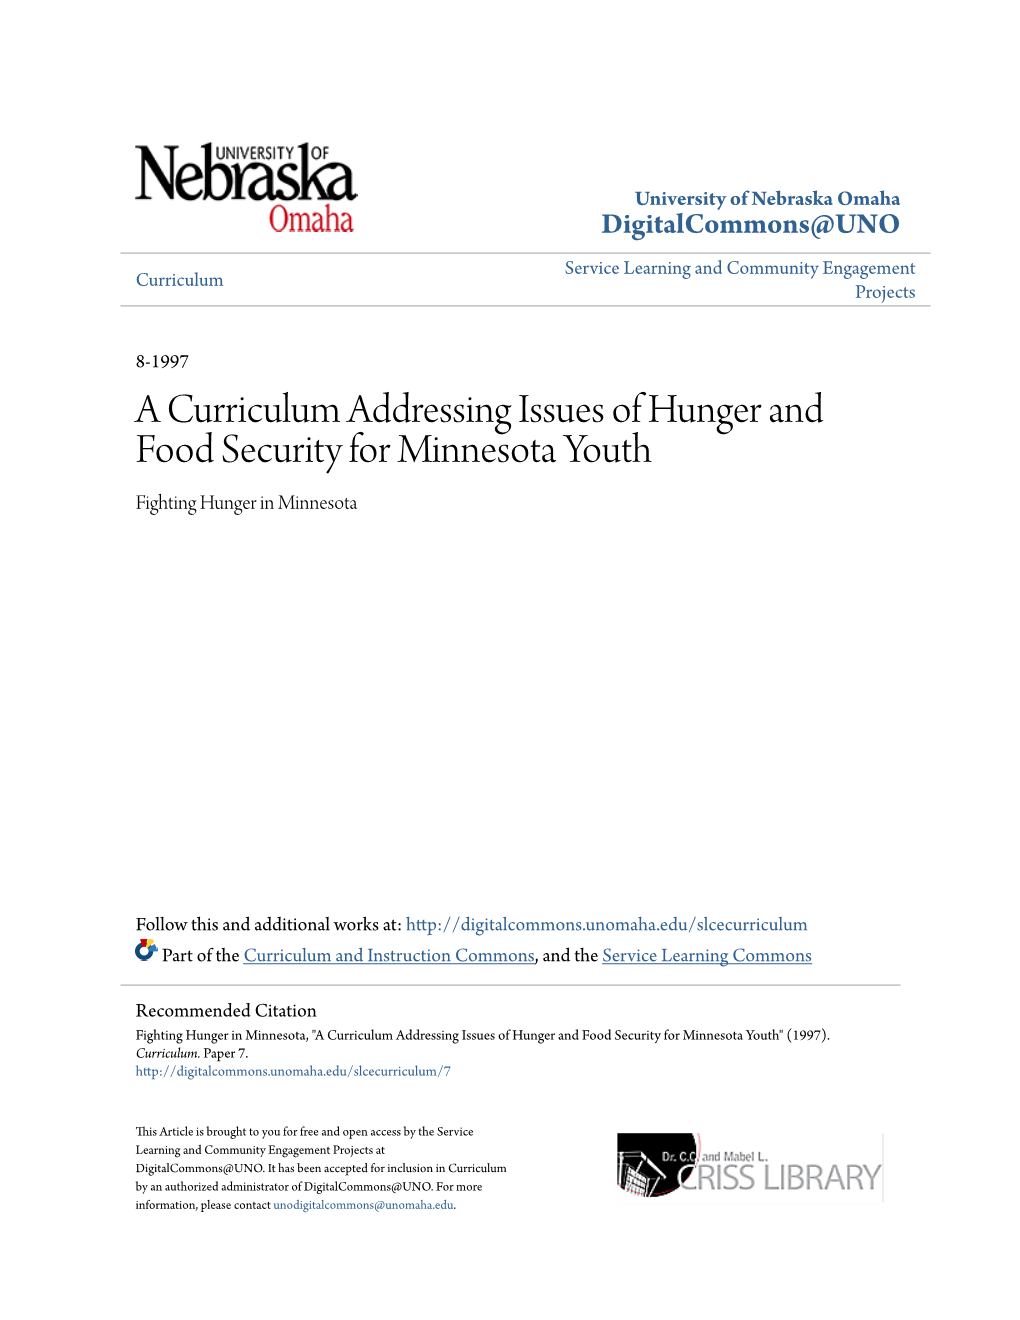 A Curriculum Addressing Issues of Hunger and Food Security for Minnesota Youth Fighting Hunger in Minnesota